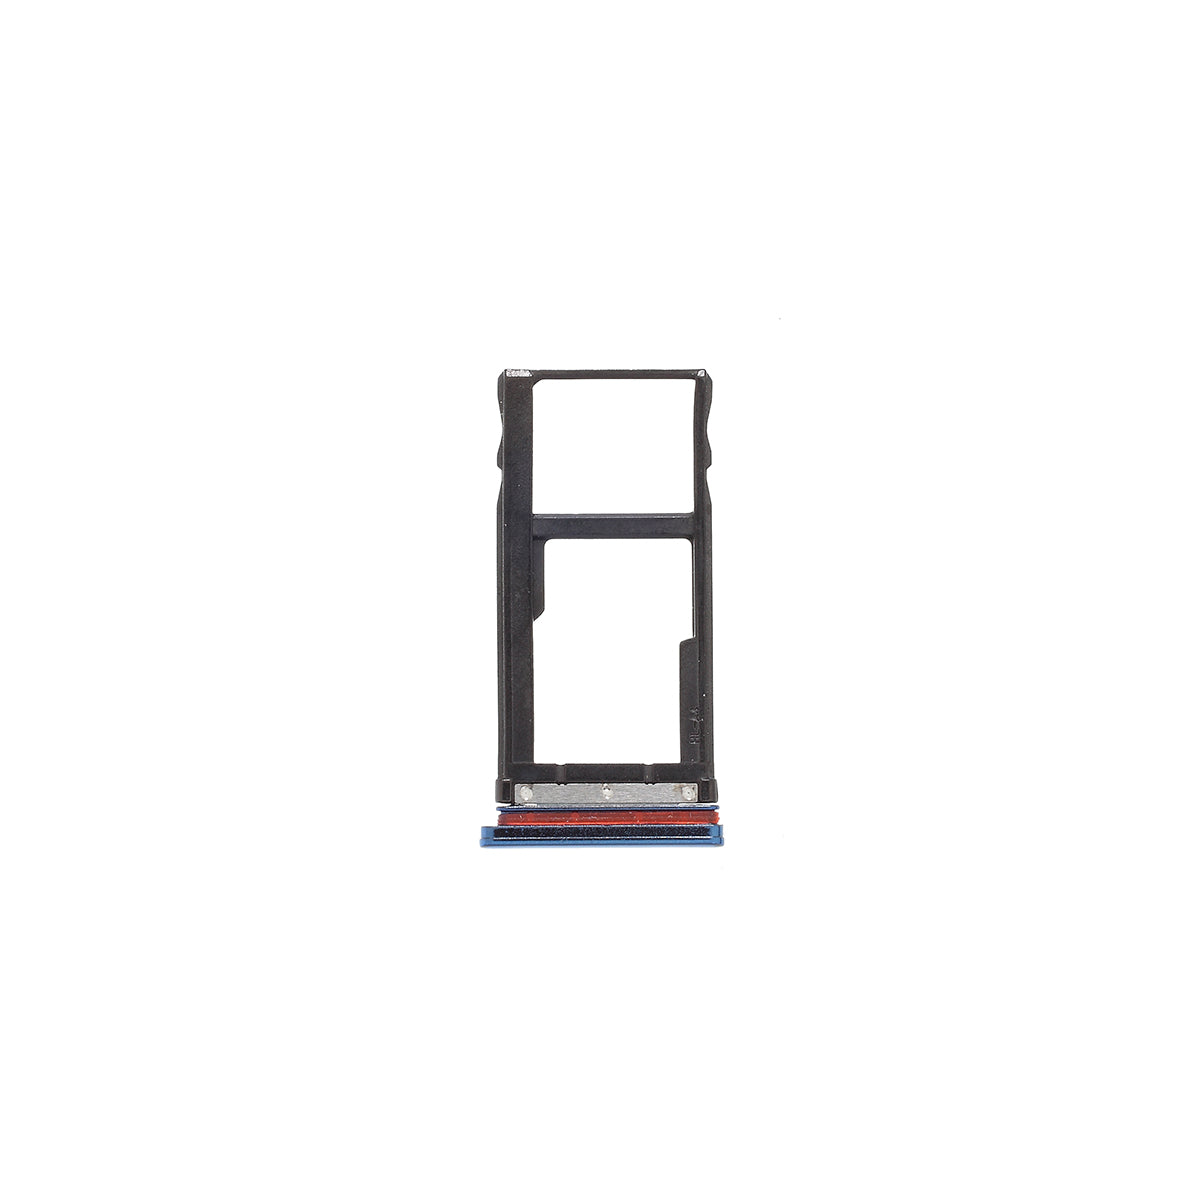 OEM Micro SD Card Tray Holder Replacement for Motorola One Vision P50 - Red / Blue